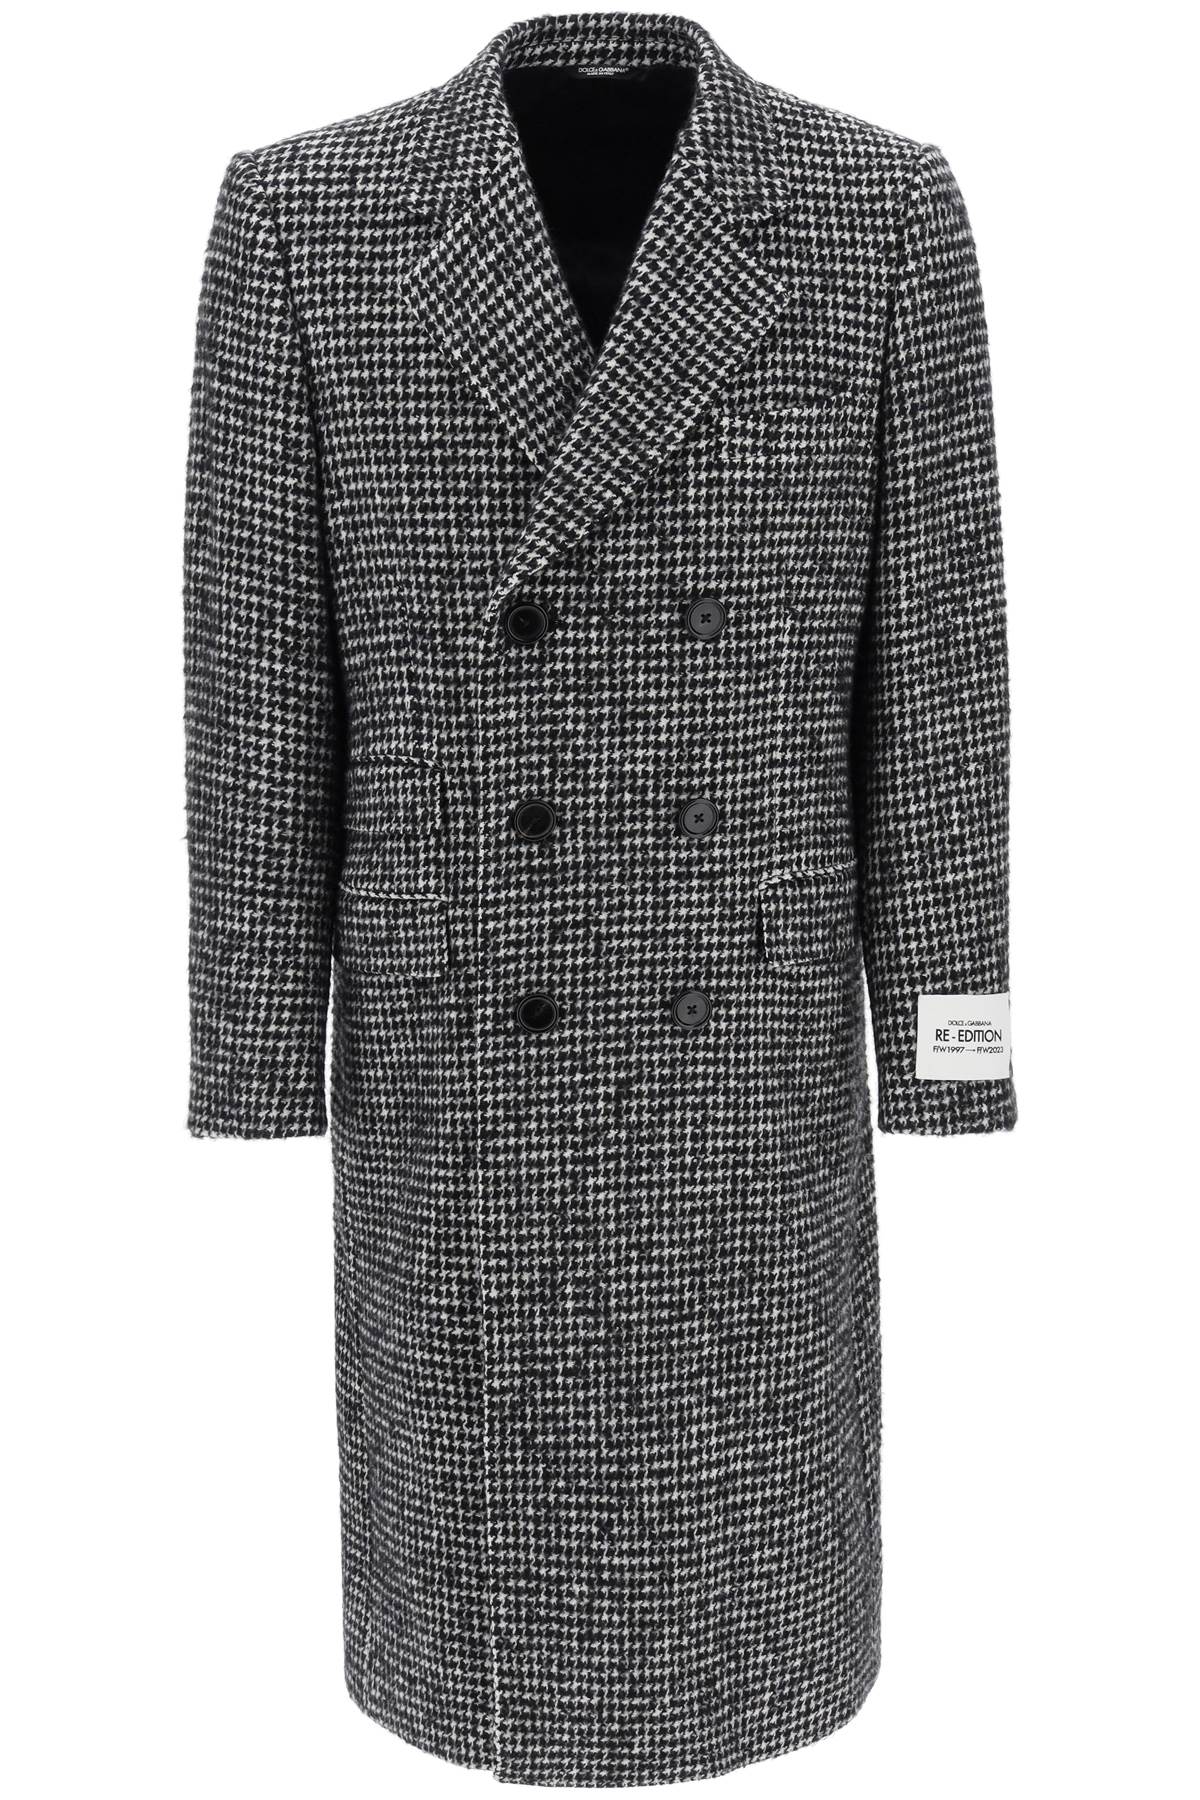 Dolce & gabbana re-edition coat in houndstooth wool-0